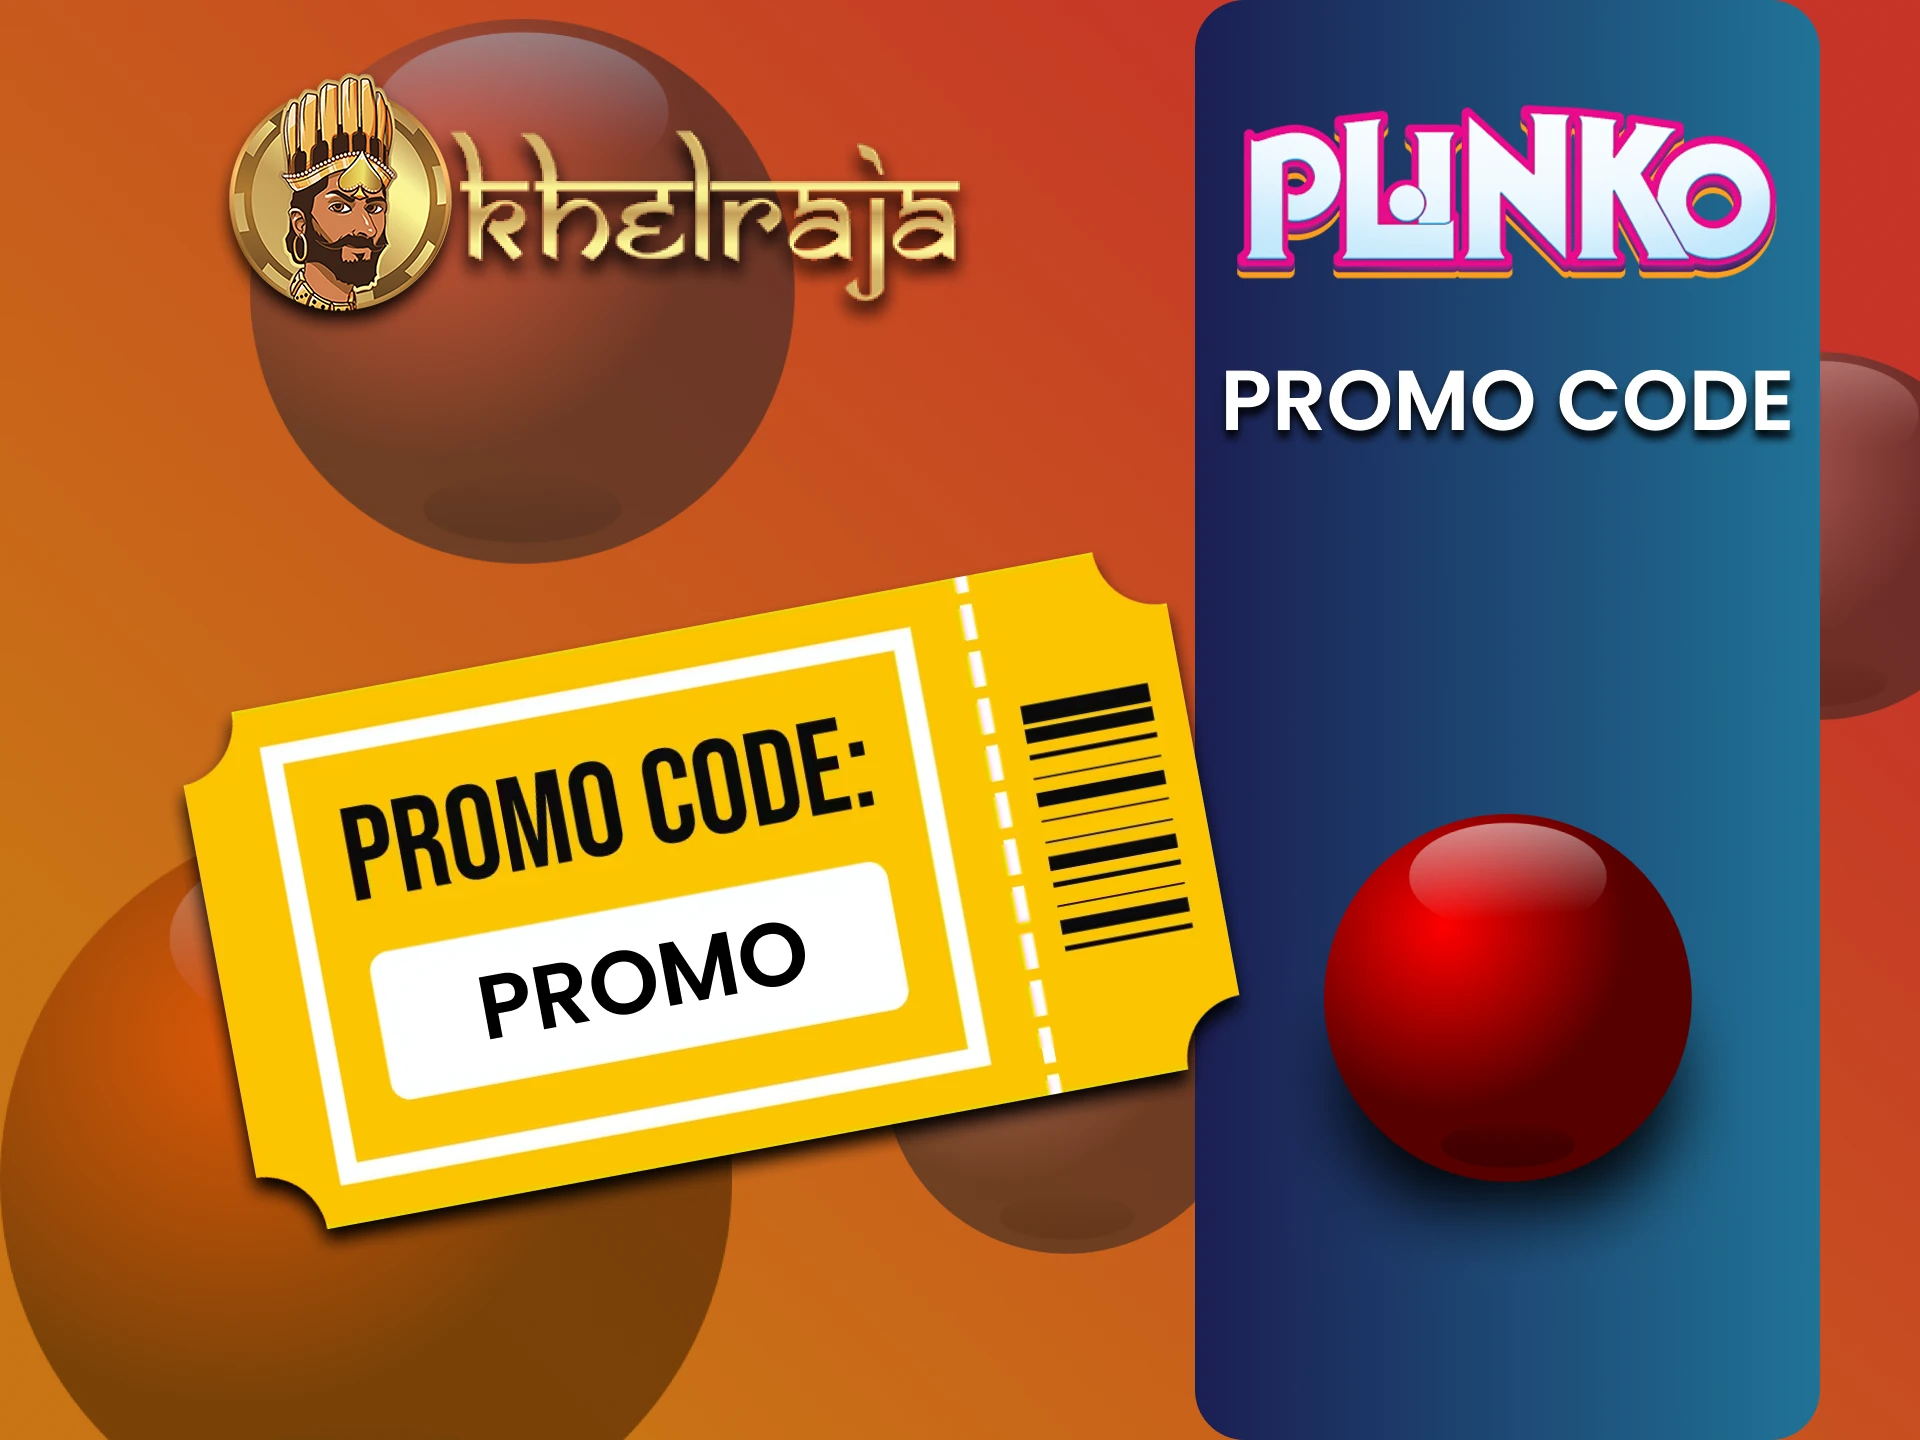 We will tell you about the promo code for Plinko from Khelraja.